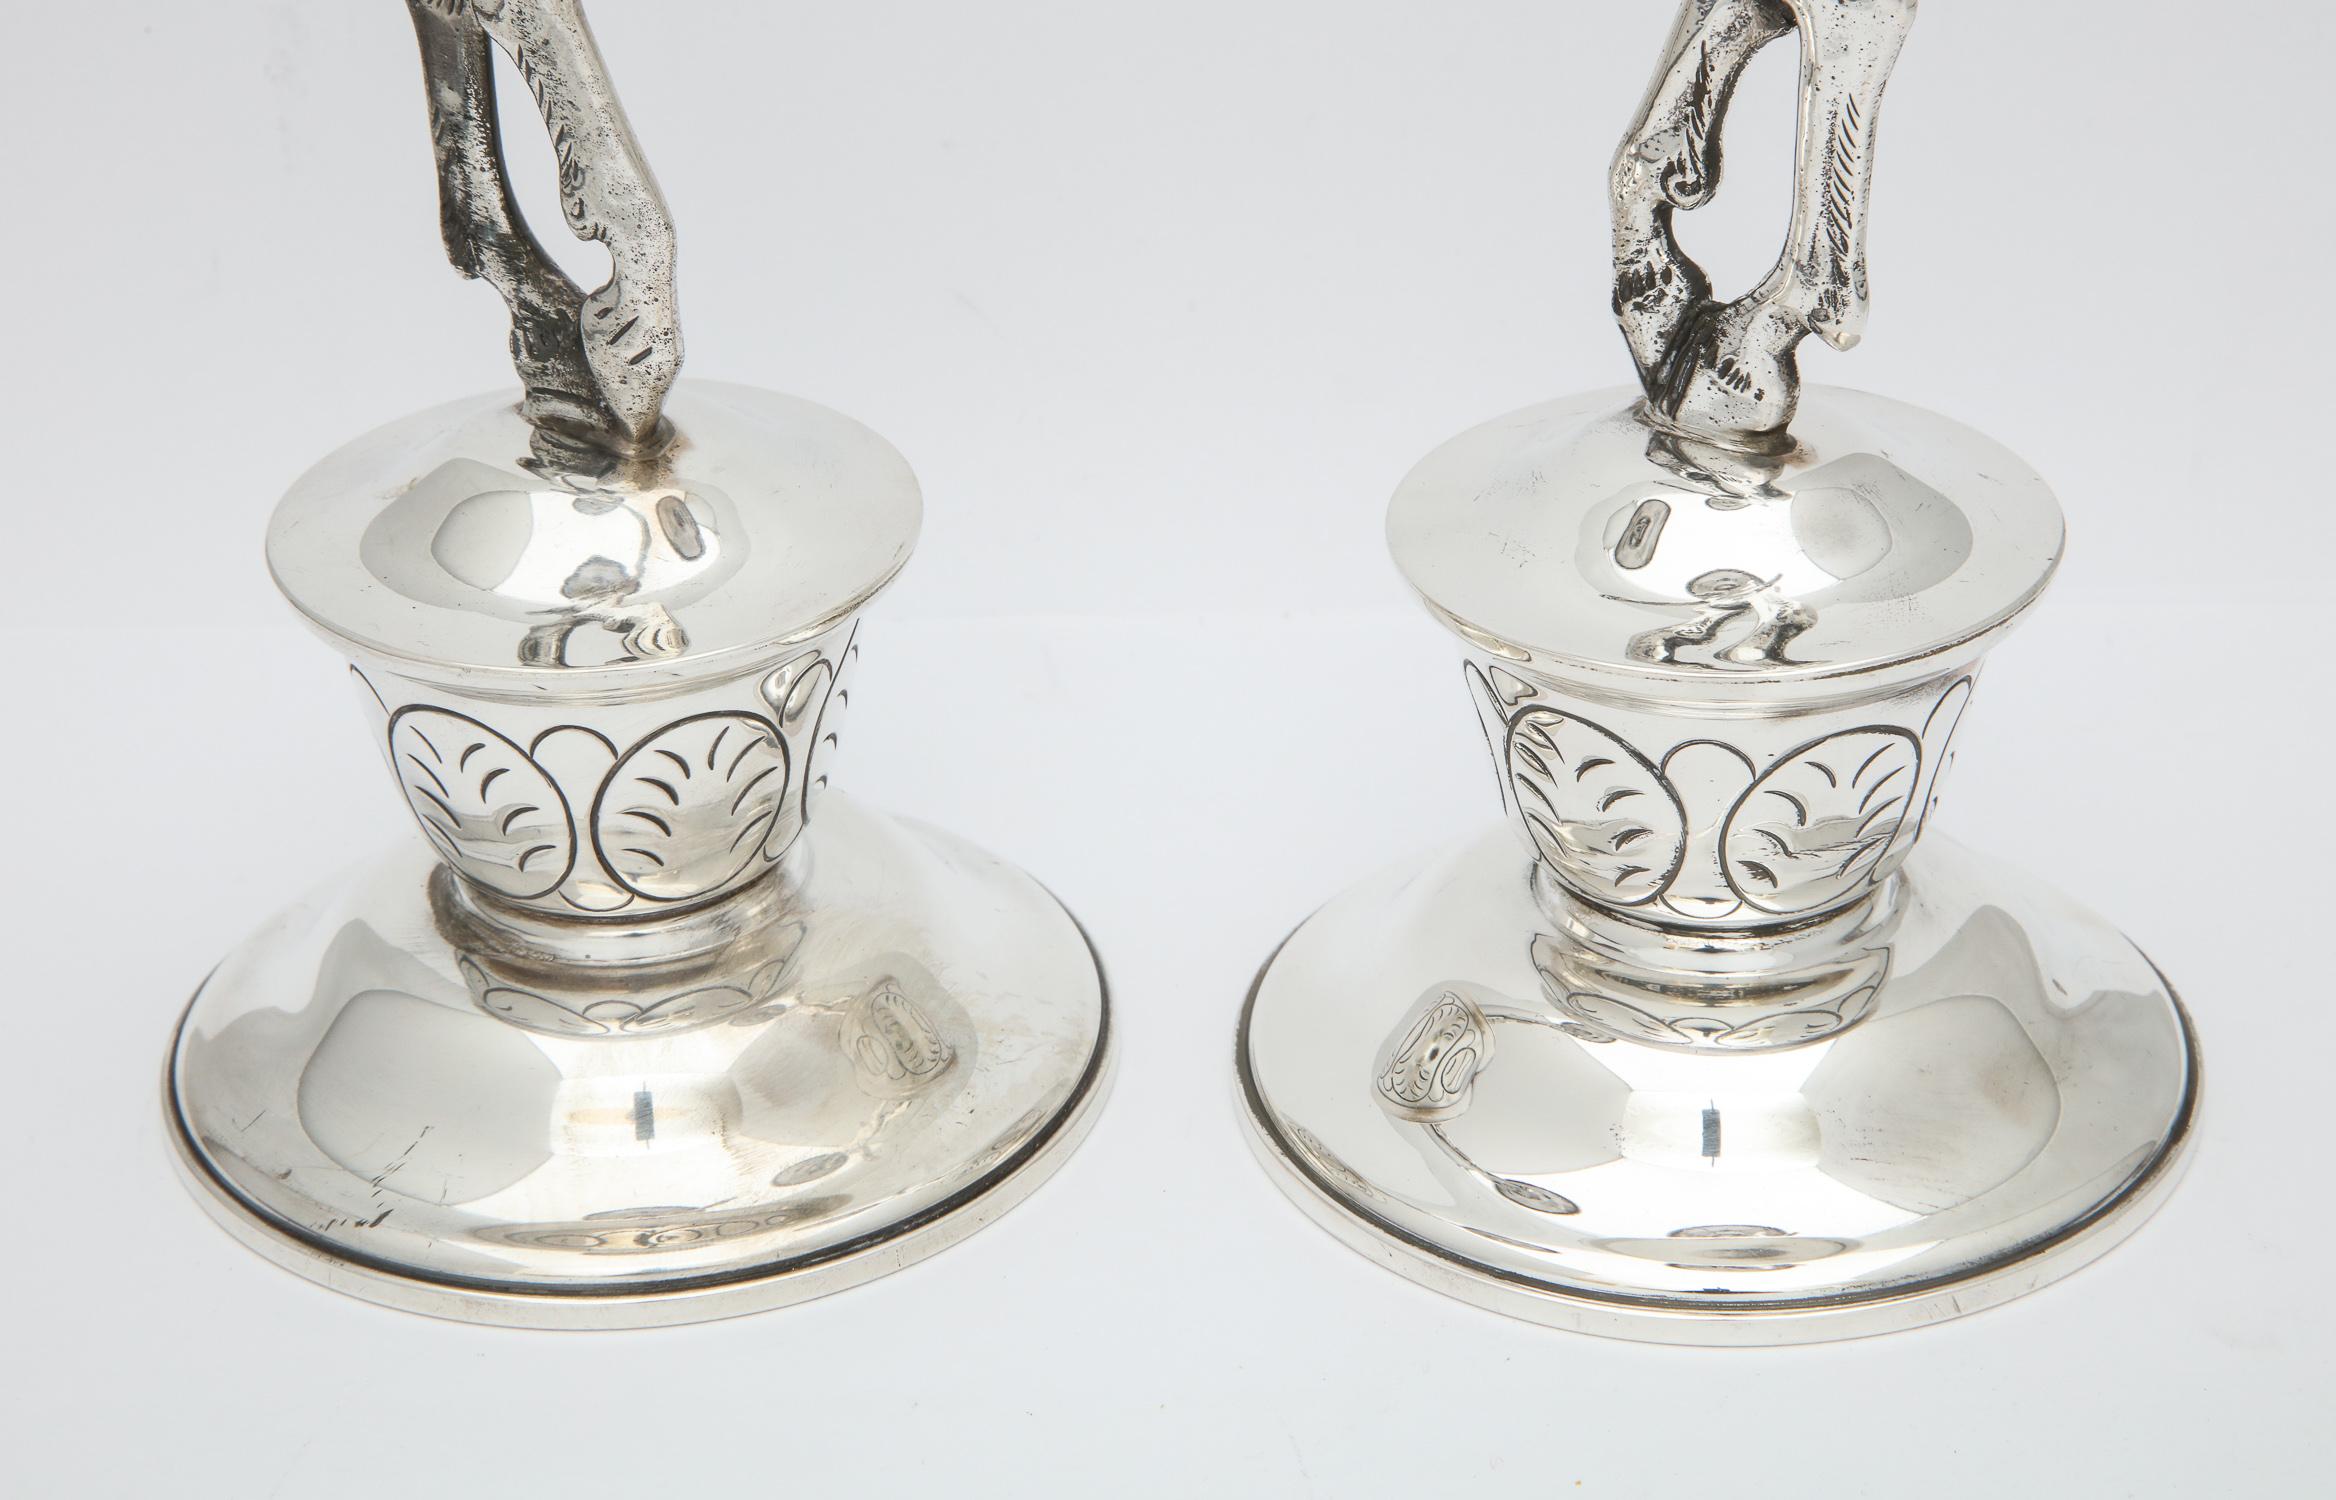 Rare Pair of Midcentury Sterling Silver Mexican Satyr-Form Candlesticks 2